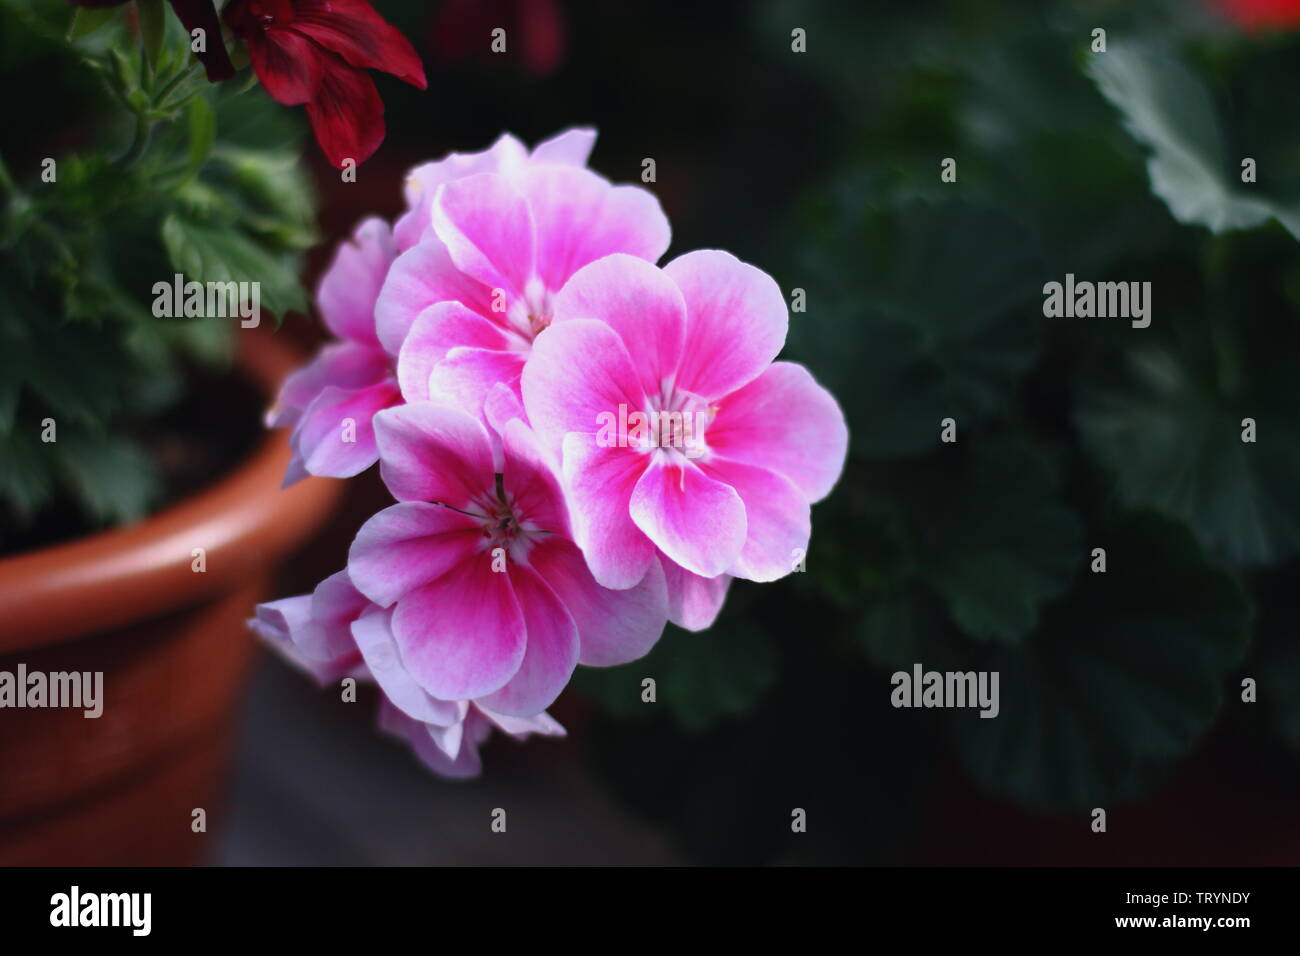 Beautiful pink and red geranium flower pots in the garden Stock Photo